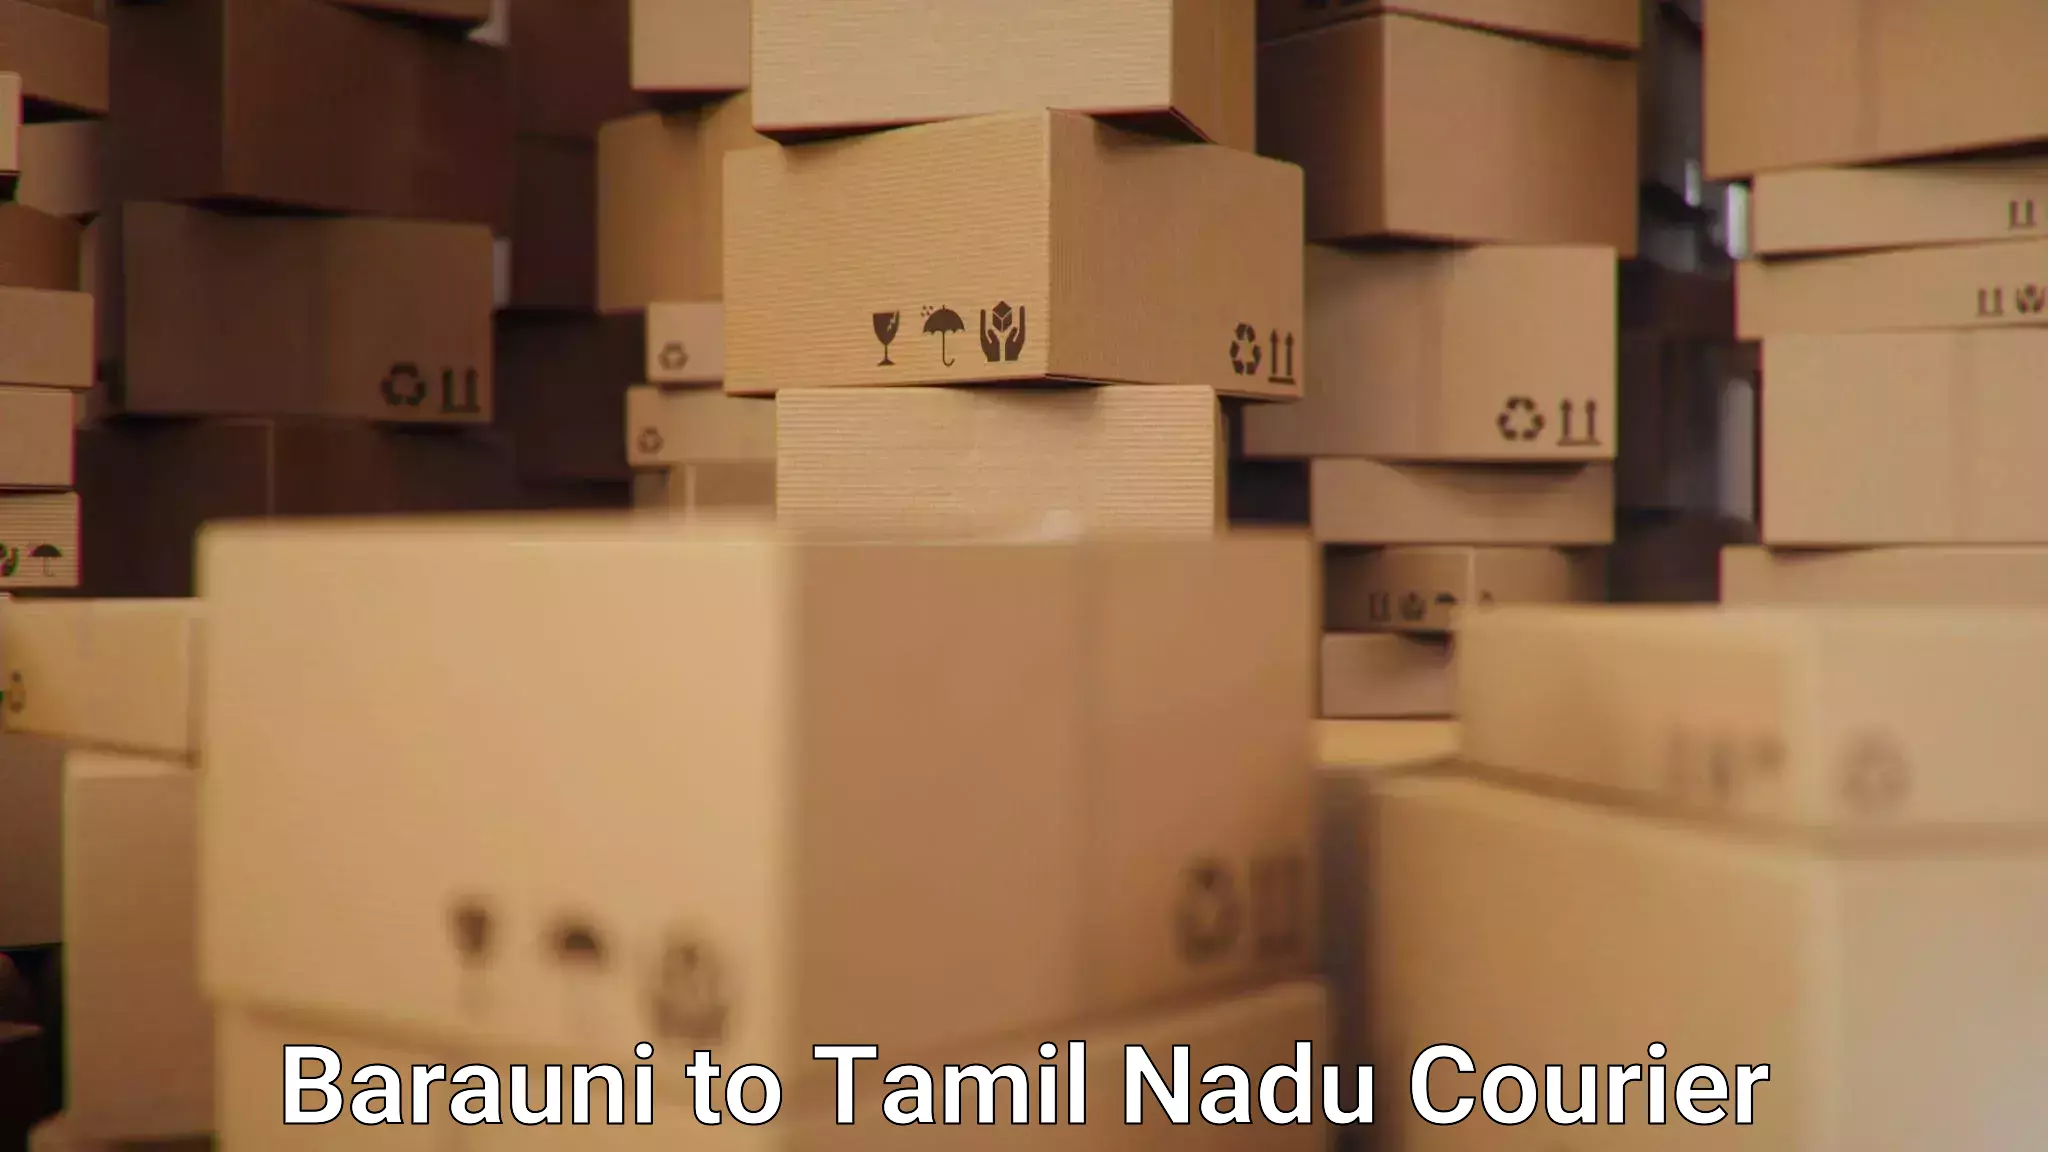 Global parcel delivery Barauni to Sriperumbudur